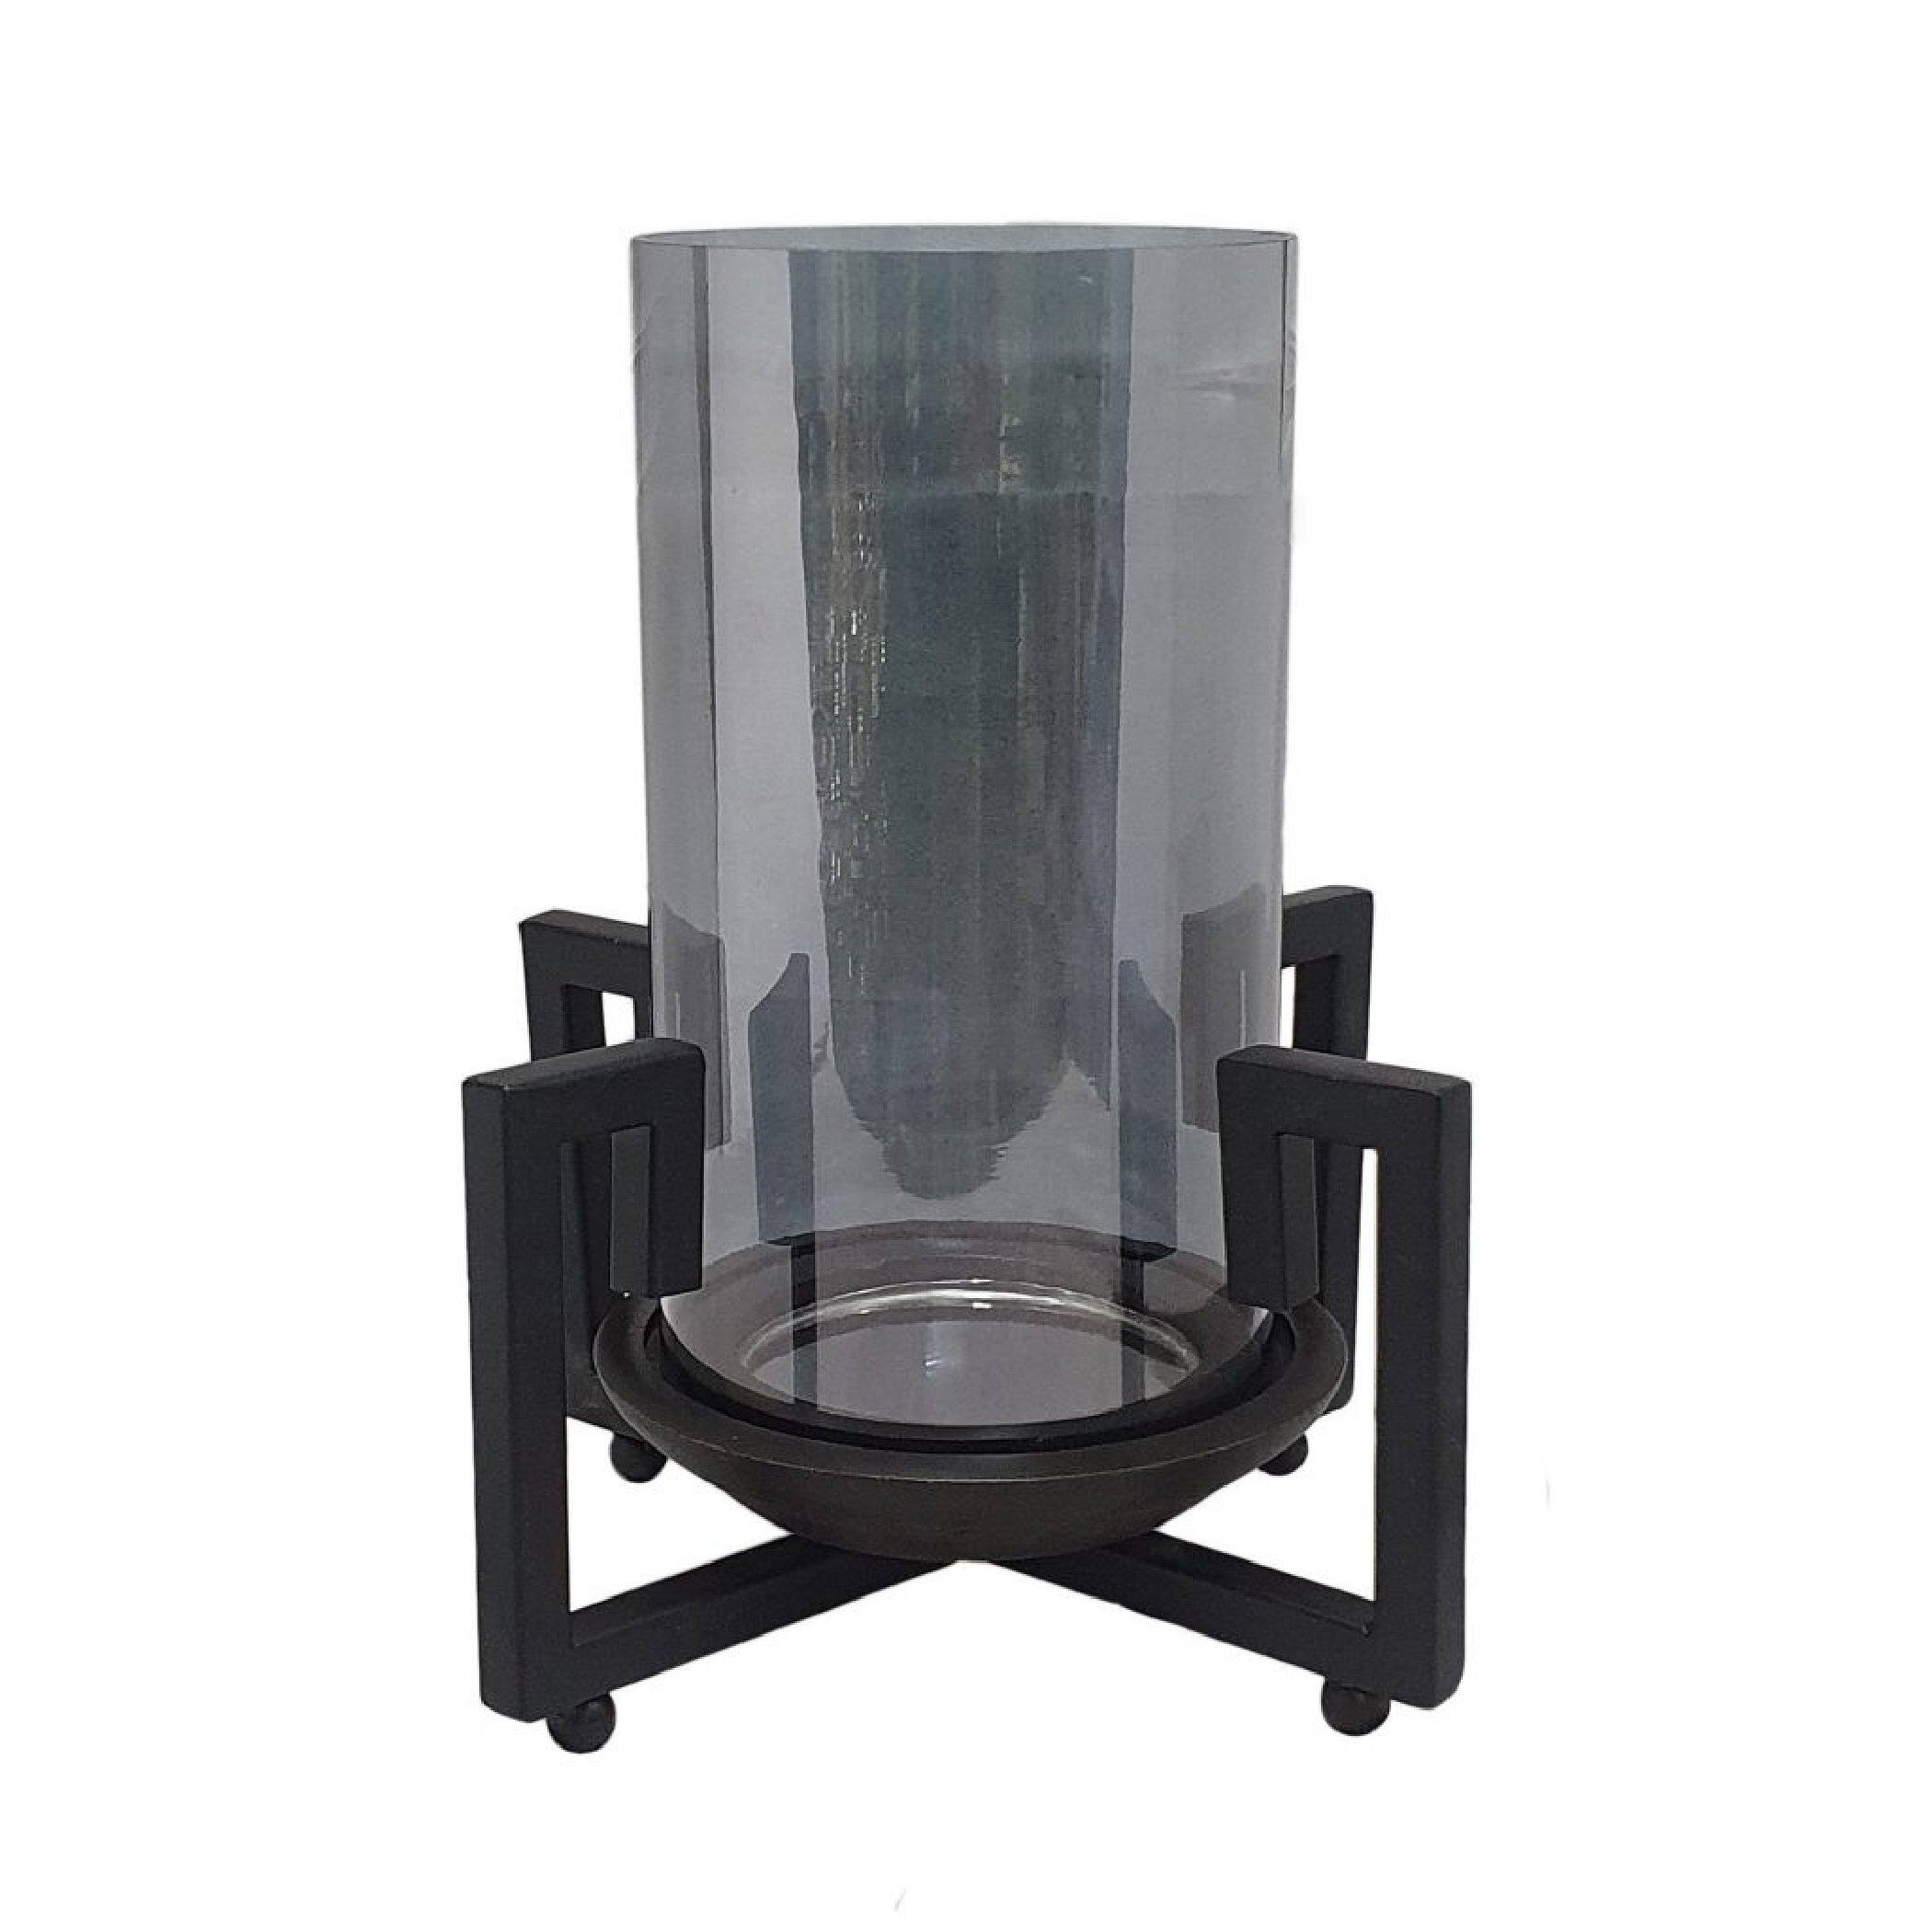 A&B Home Carina Glass Candle Holder with Steel Base - Black/Gray/Luster